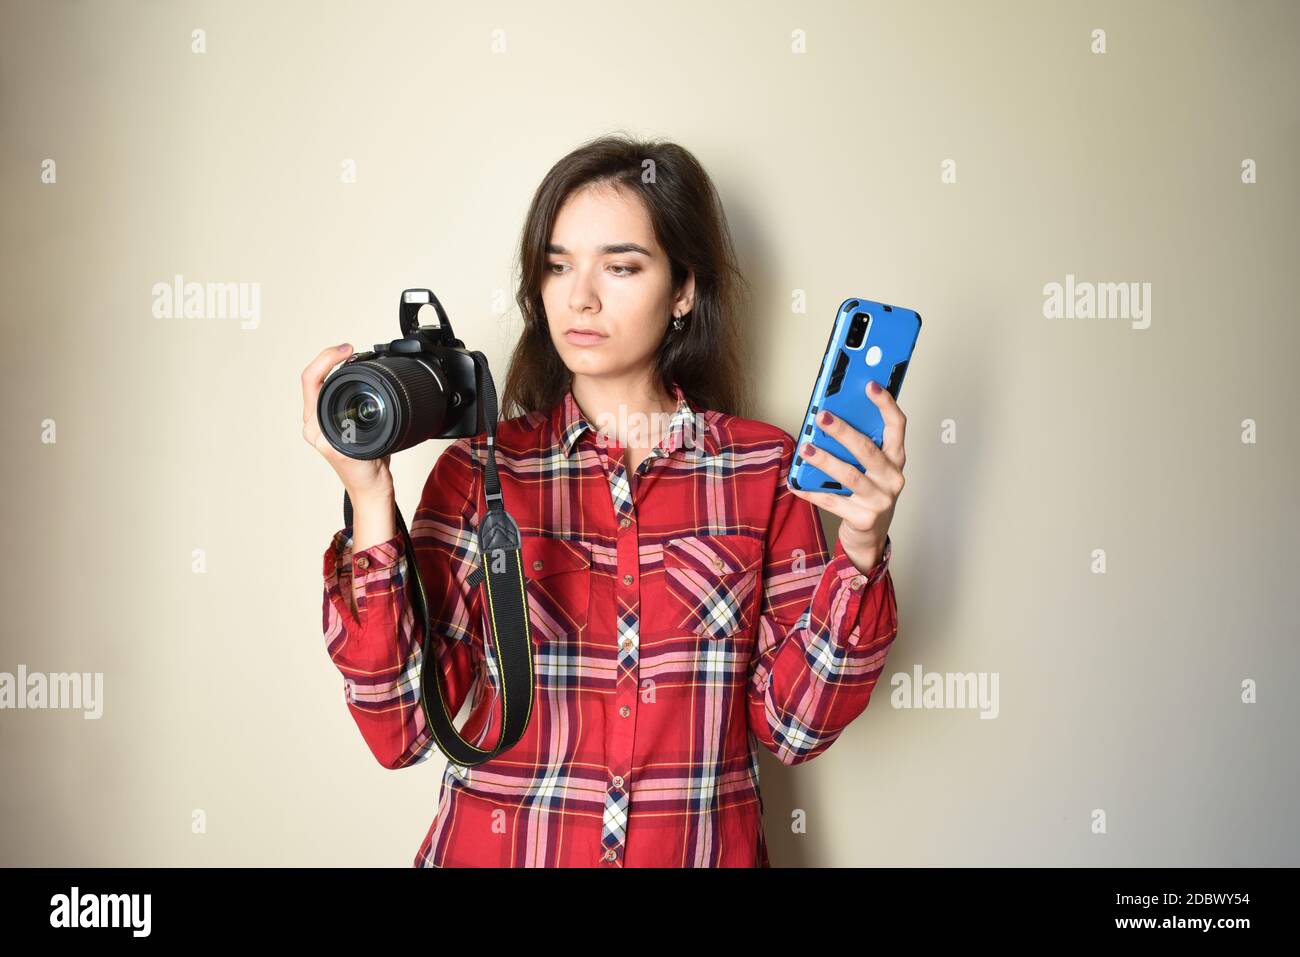 Young brunette woman photographer in red shirt choosing between camera and mobile phone on beige background. Concept of choice and difference Stock Photo